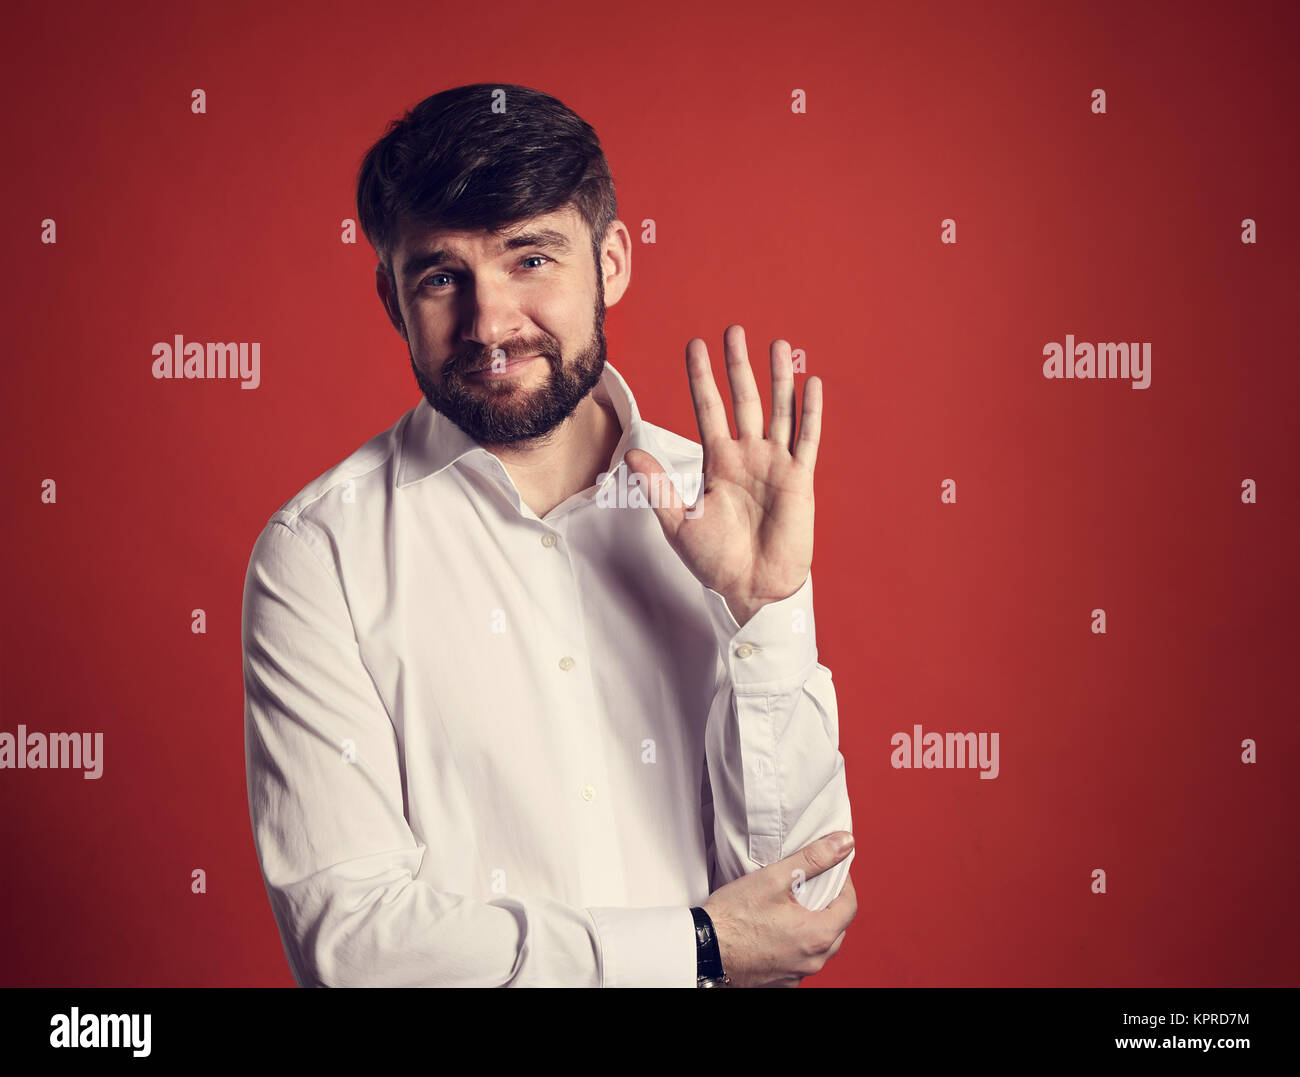 Happy smiling bearded businessman waving the hand and saying hello in fashion white style shirt on dark red background. Closeup toned portrait Stock Photo